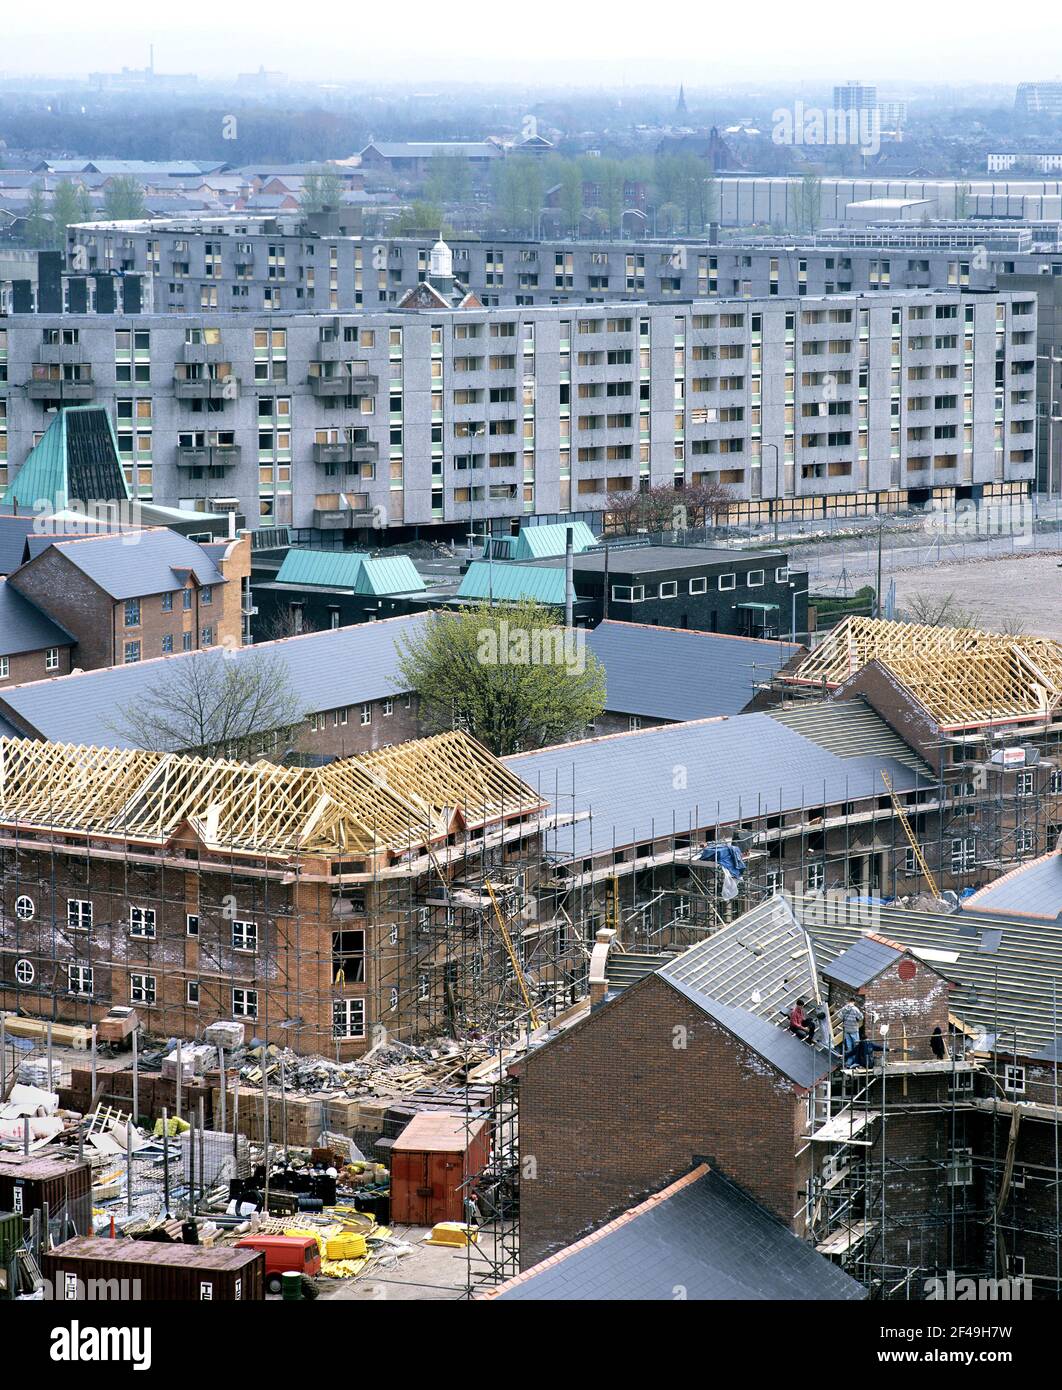 New housing association houses being built in Hulme, Manchester, with some of the 1970s Hulme Crescents behind, boarded up prior to demolition. Stock Photo